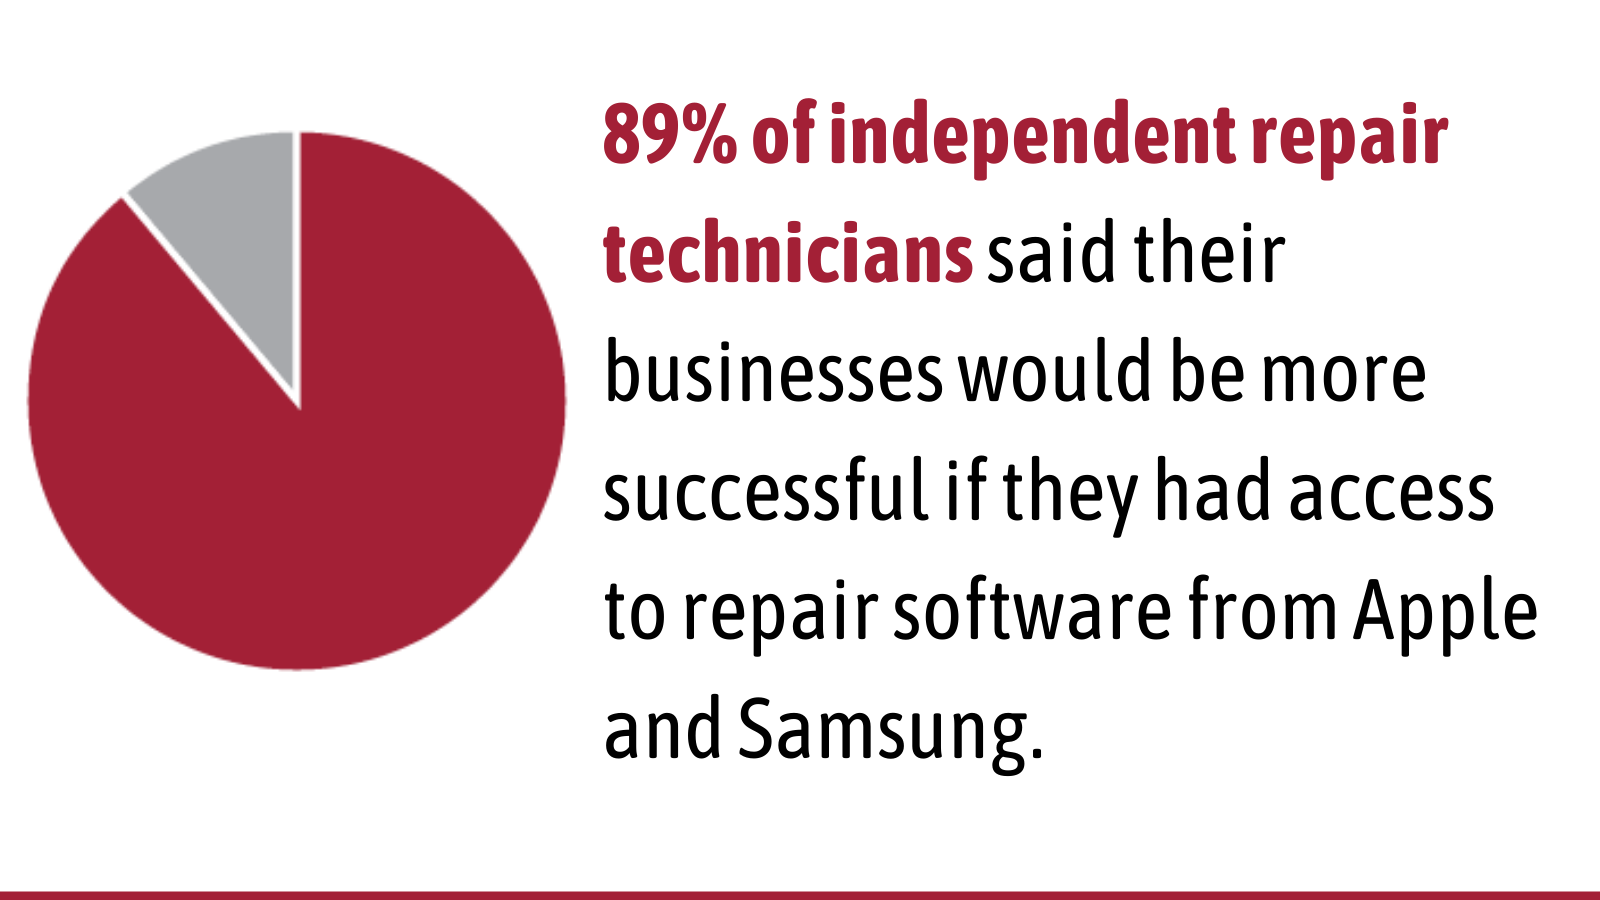 89% of independent repair technicians said their businesses would be more successful if they had access to repair software from Apple and Samsung.